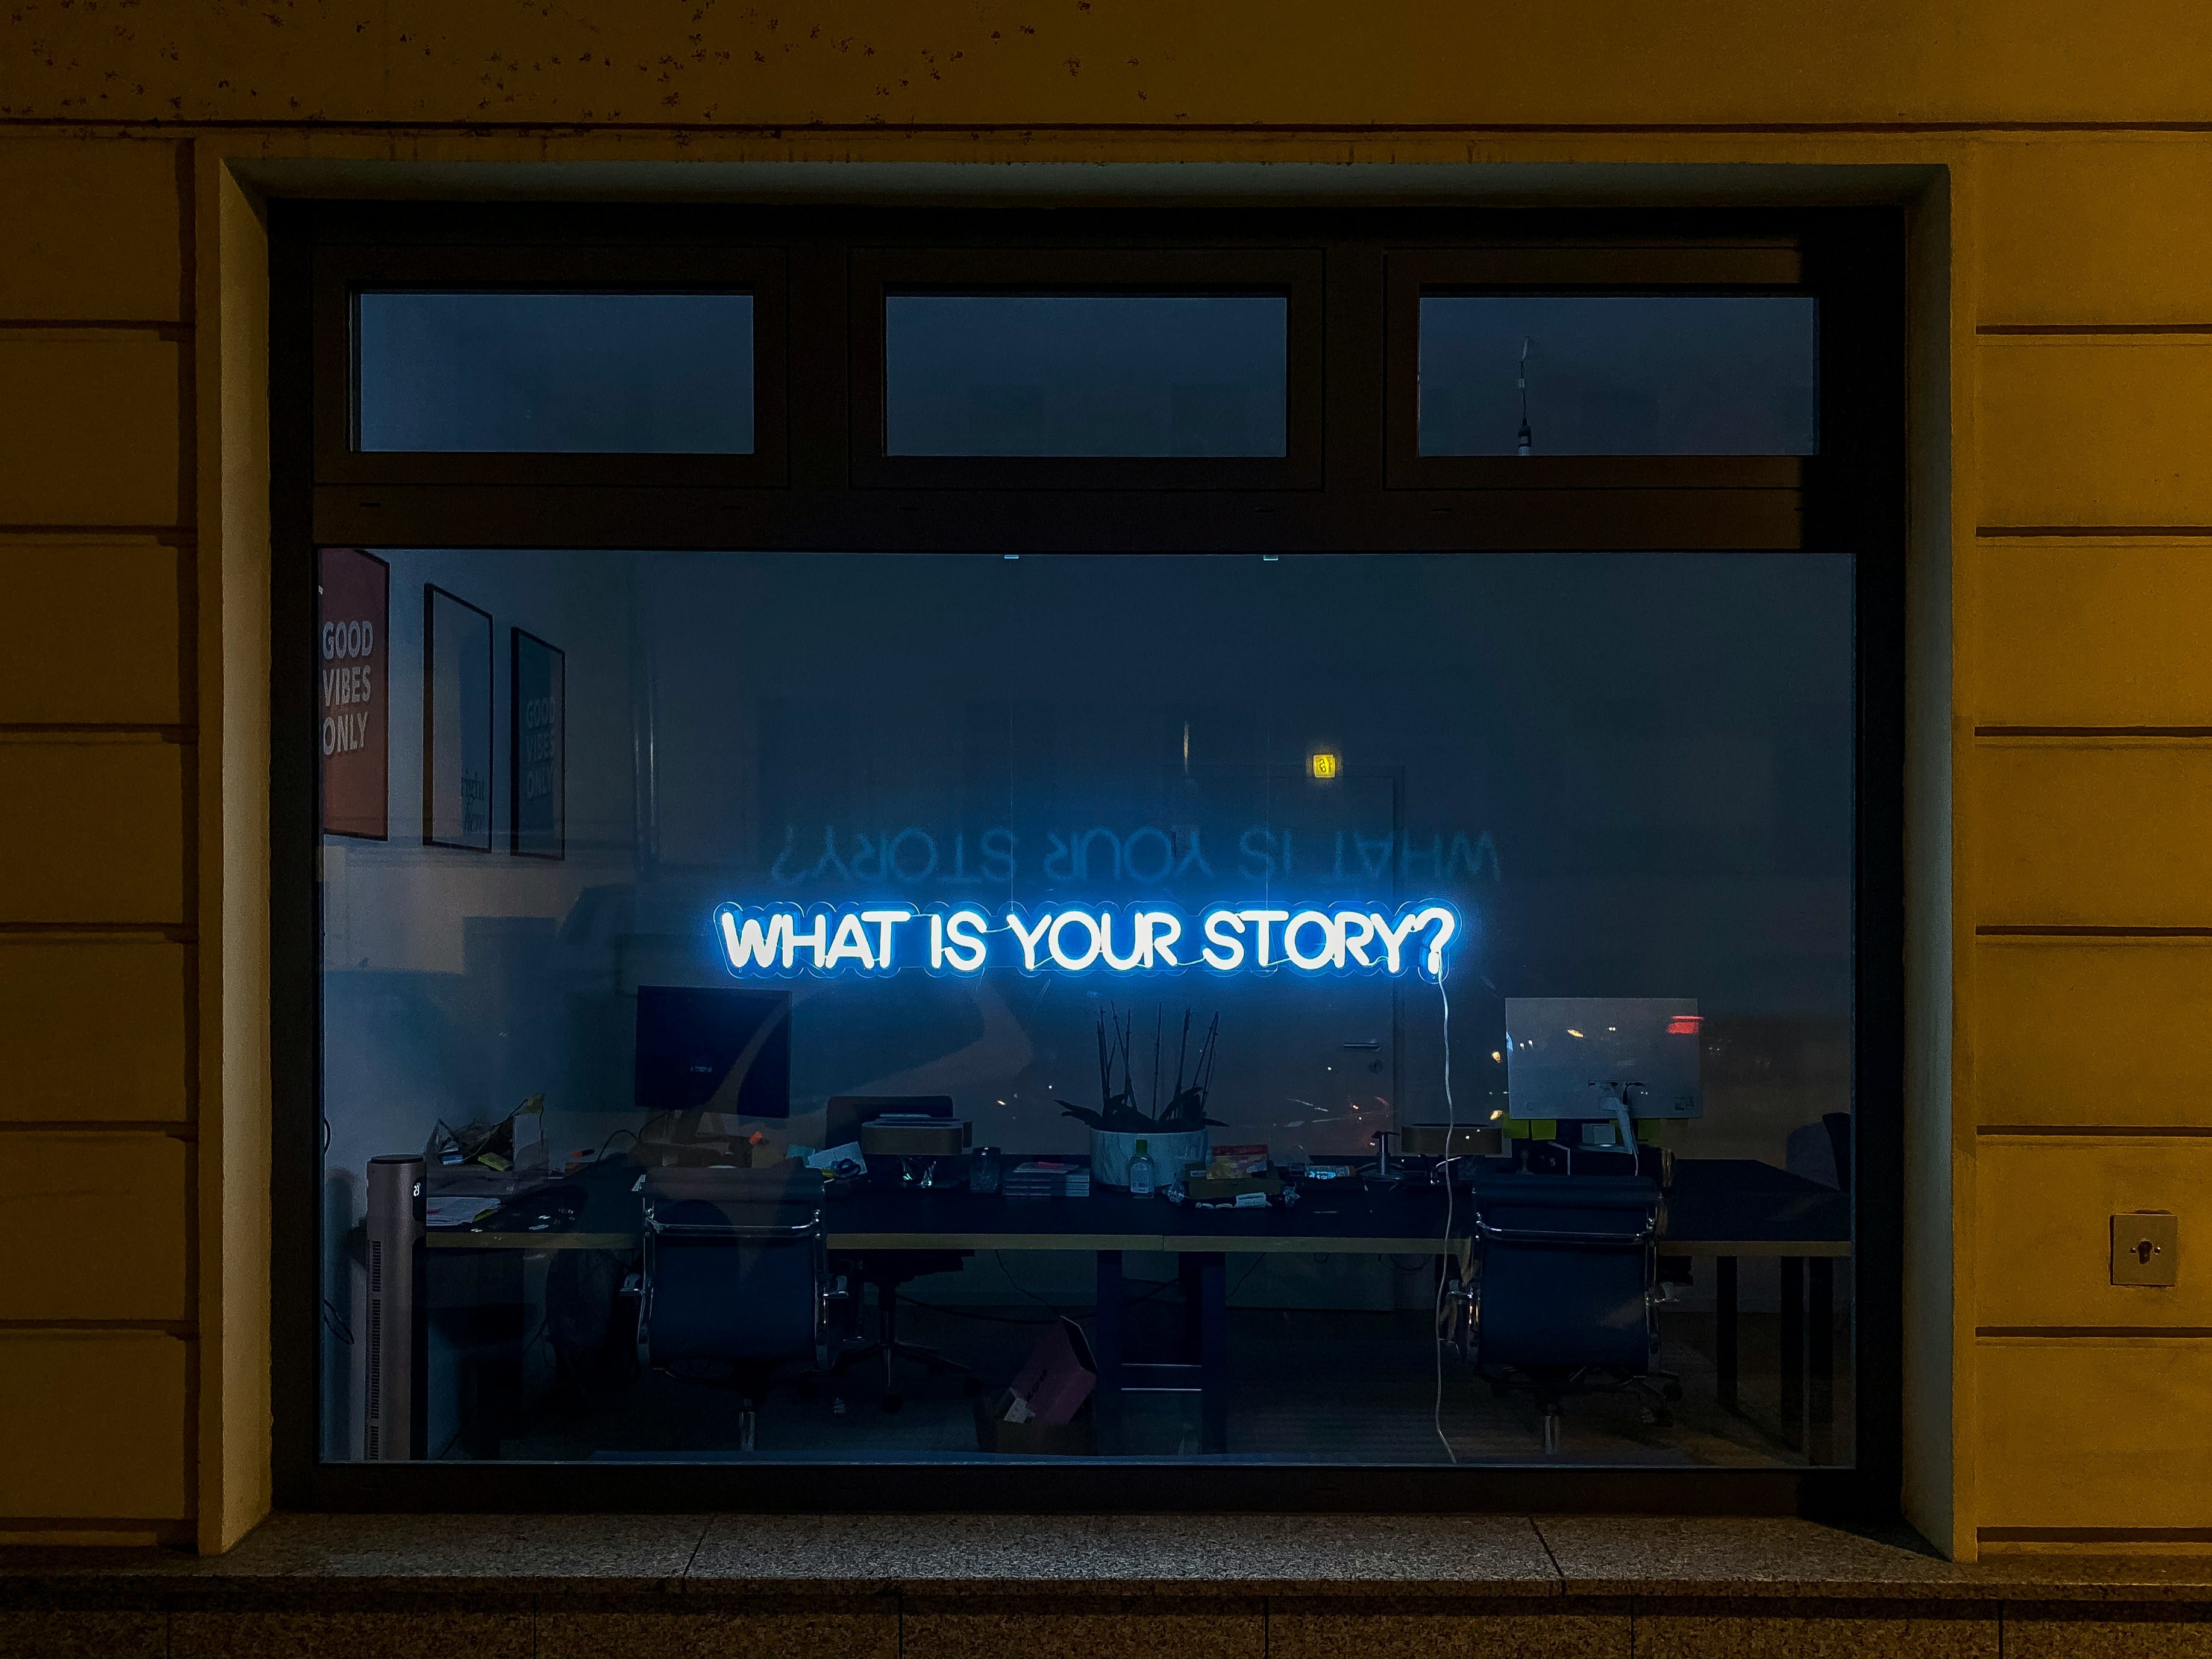 A neon sign in a window that says "what is your story?"